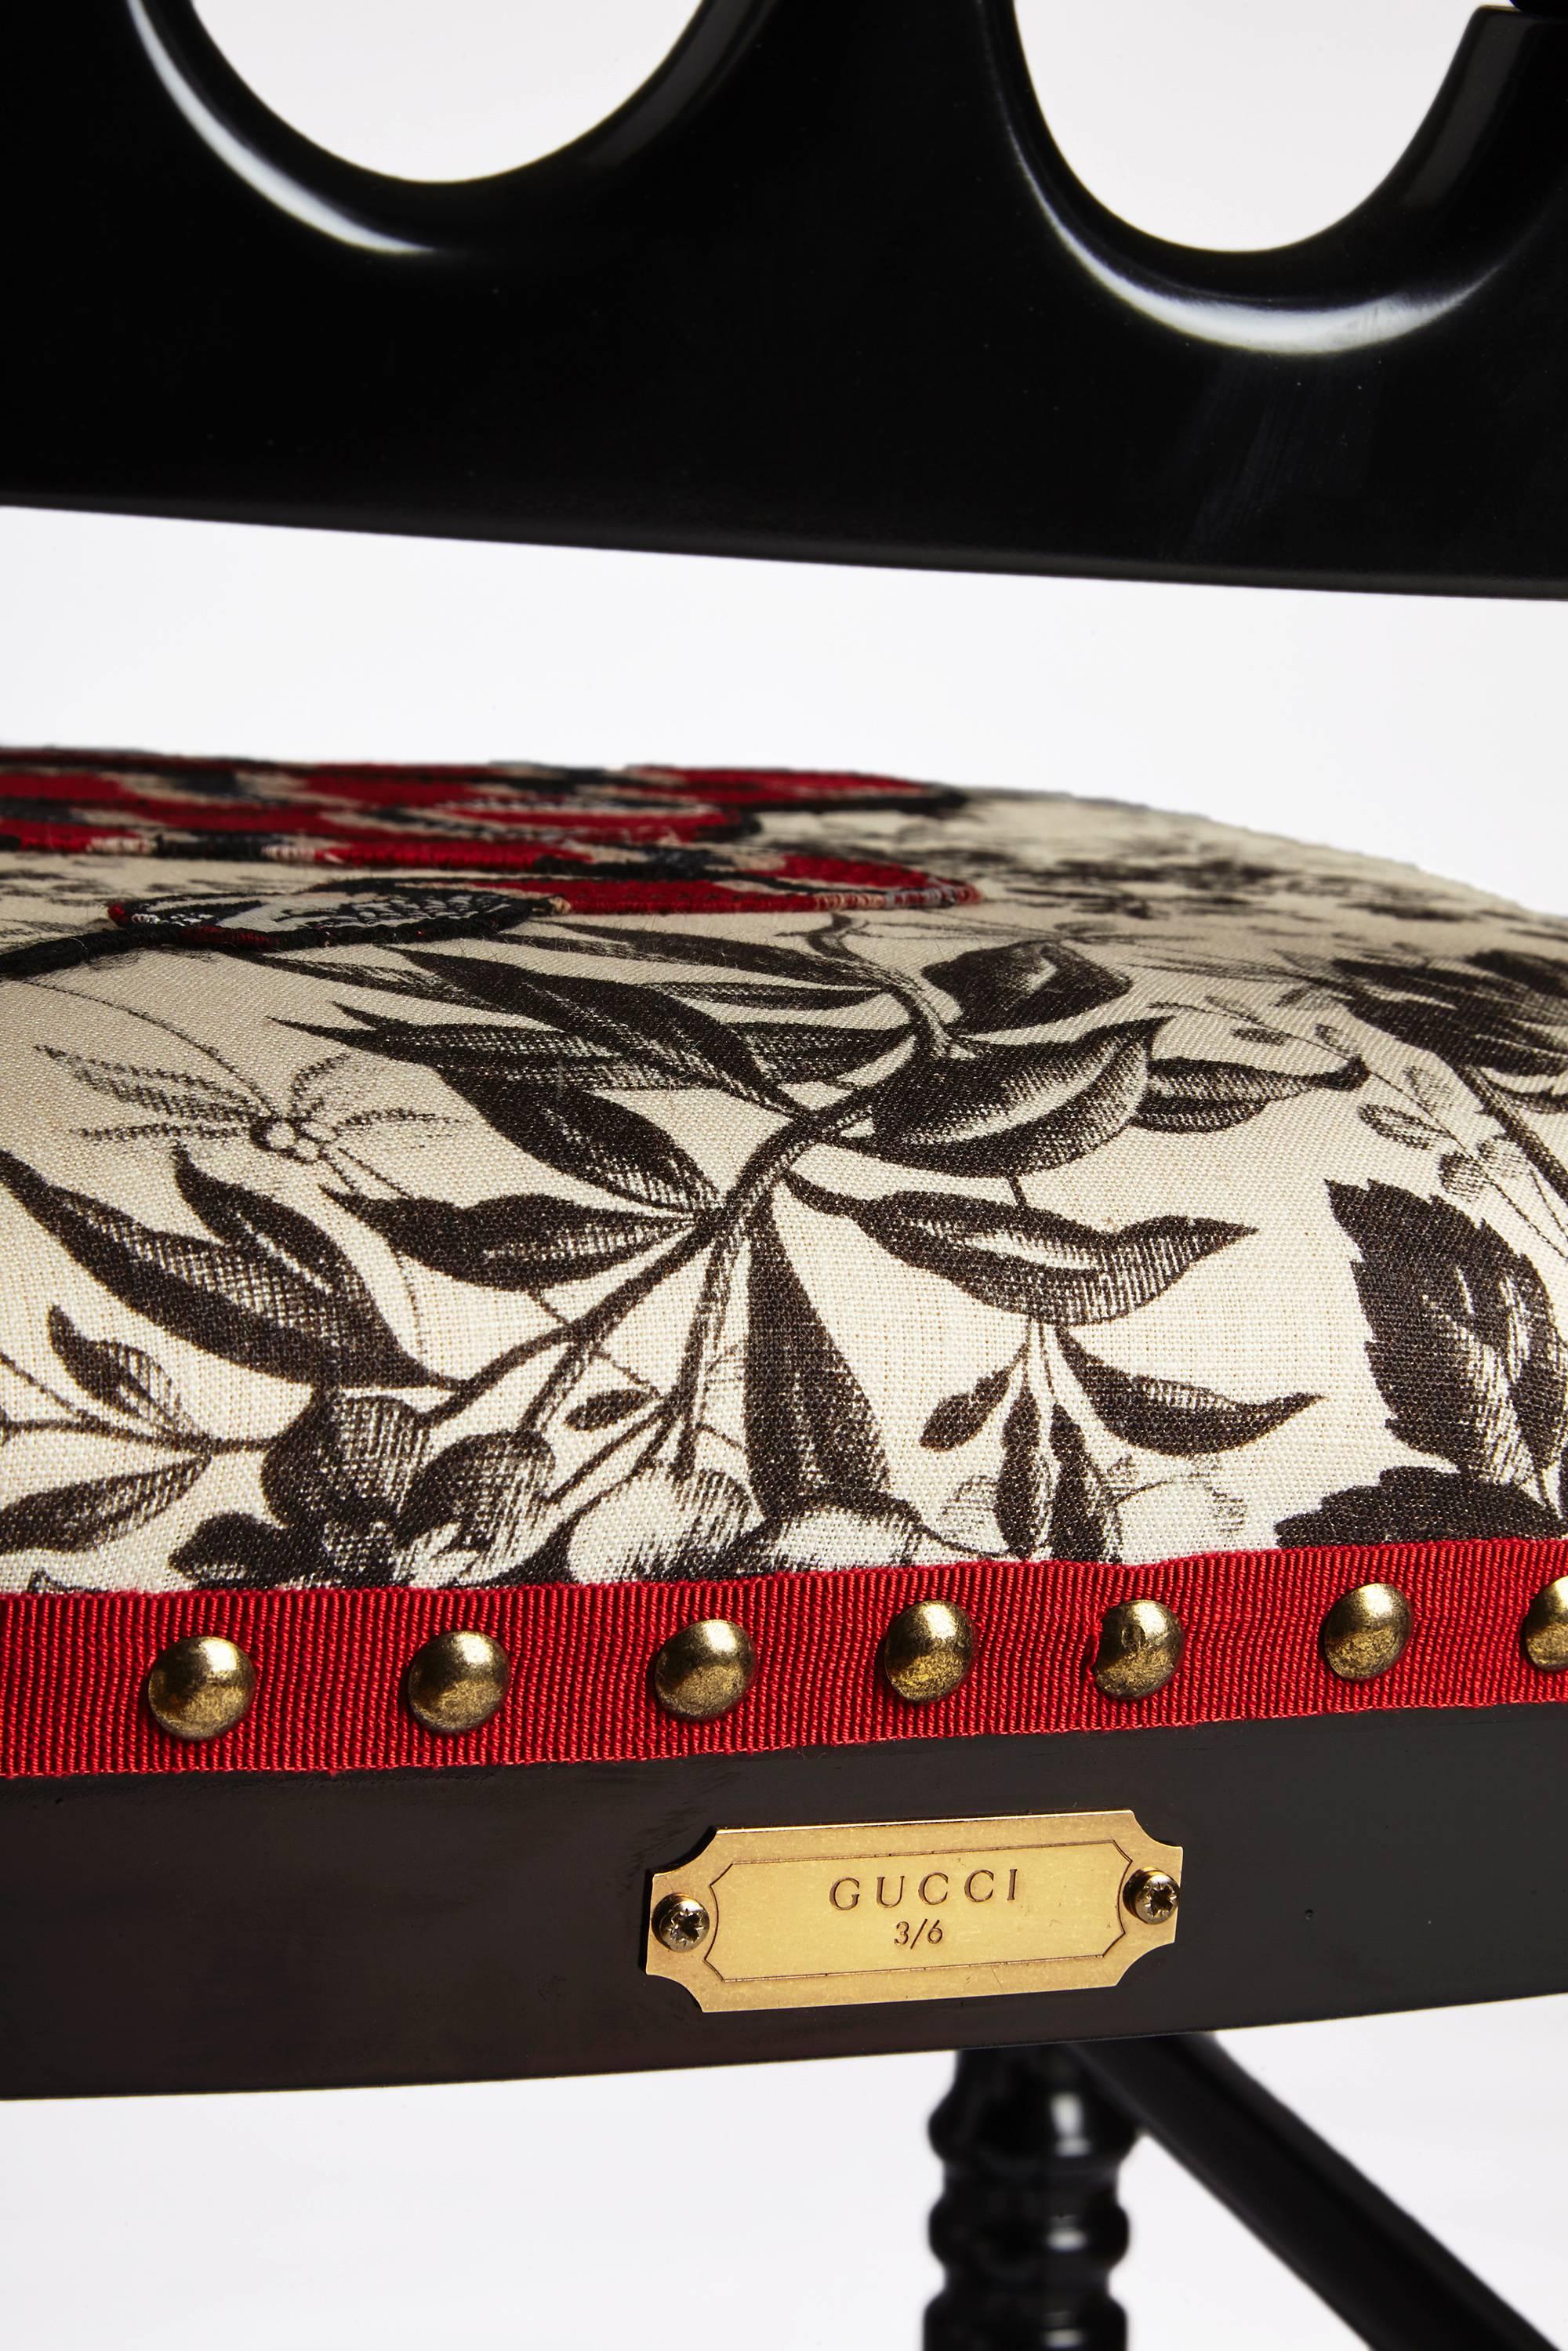 Italian Unique Chair by Gucci, Hand Embroidered Snake on Black Herbarium Fabric